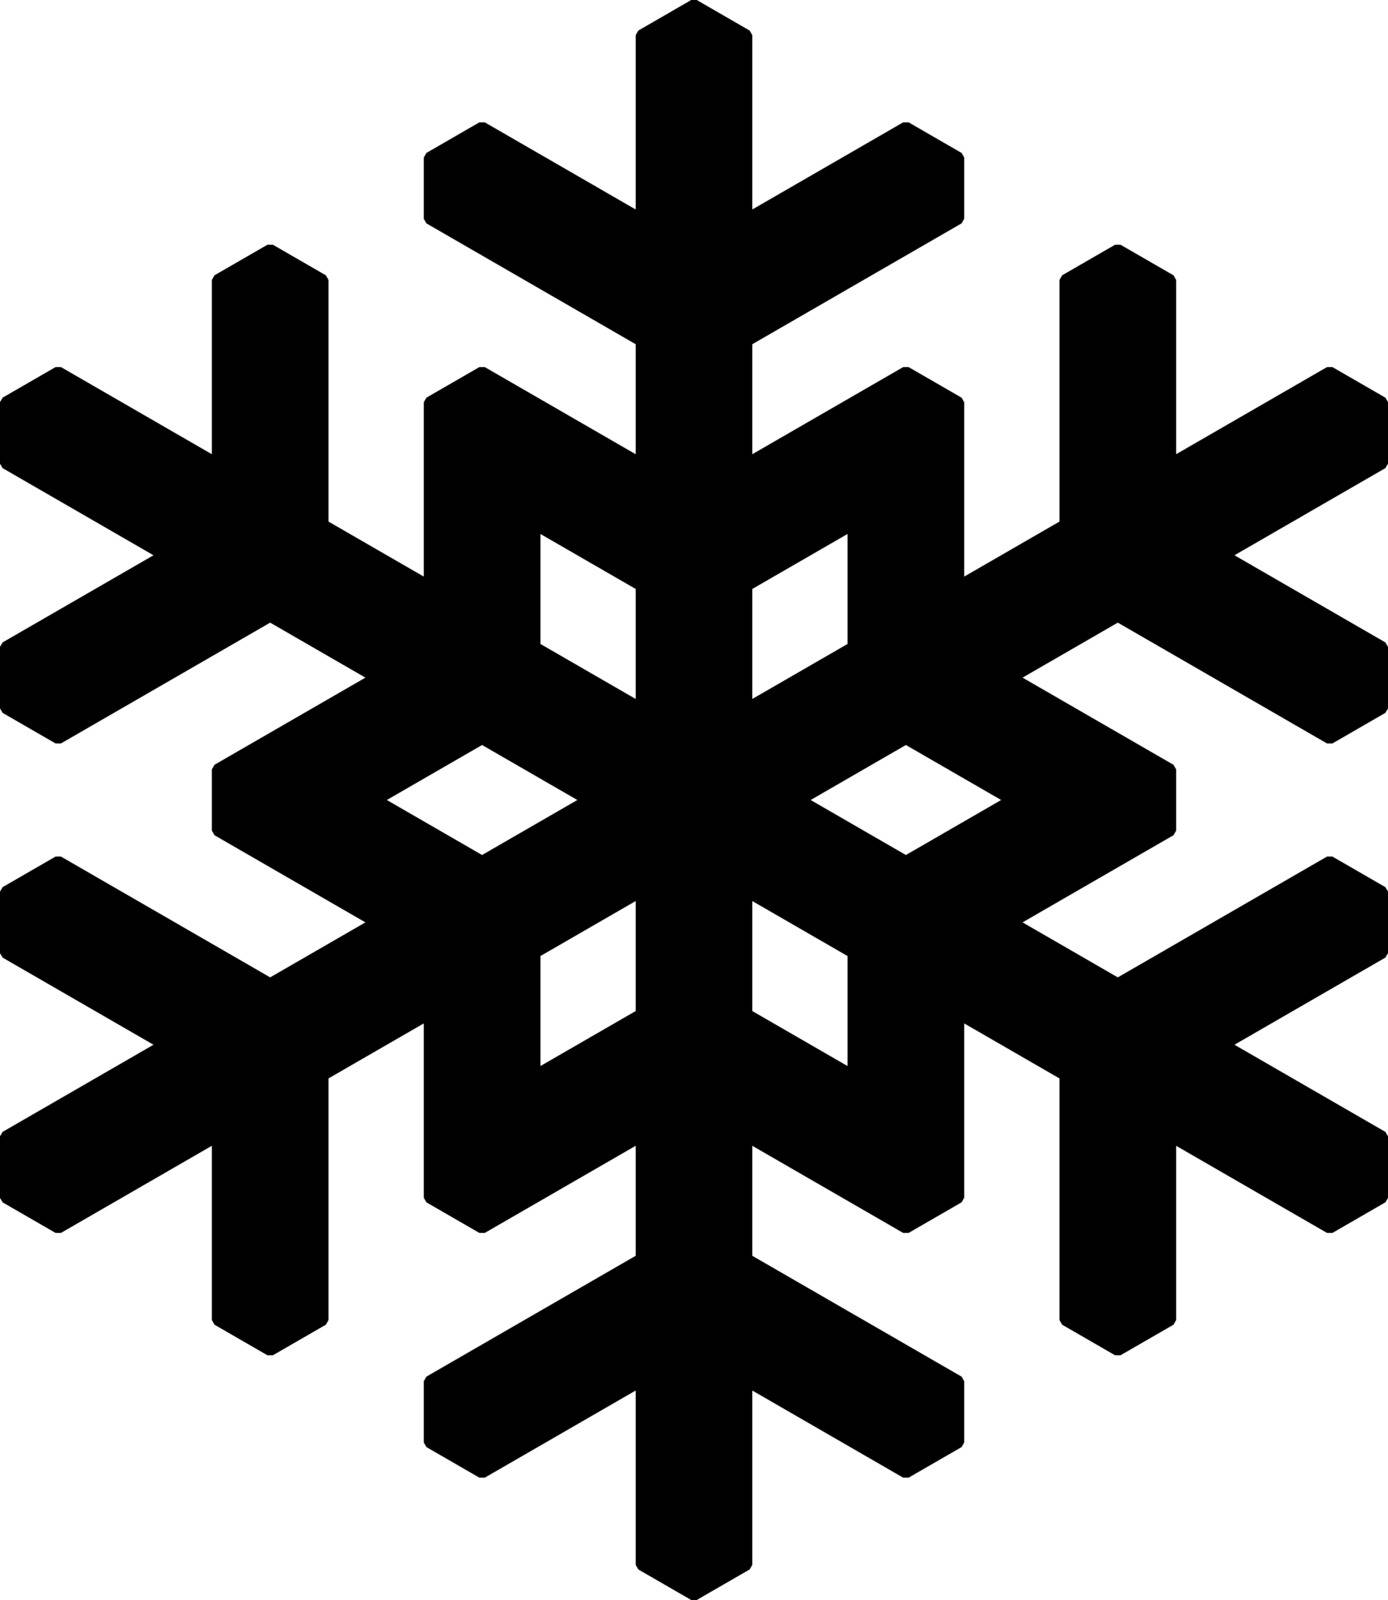 Snowflake icon. Christmas and winter theme. Simple flat black illustration on white background by pyty